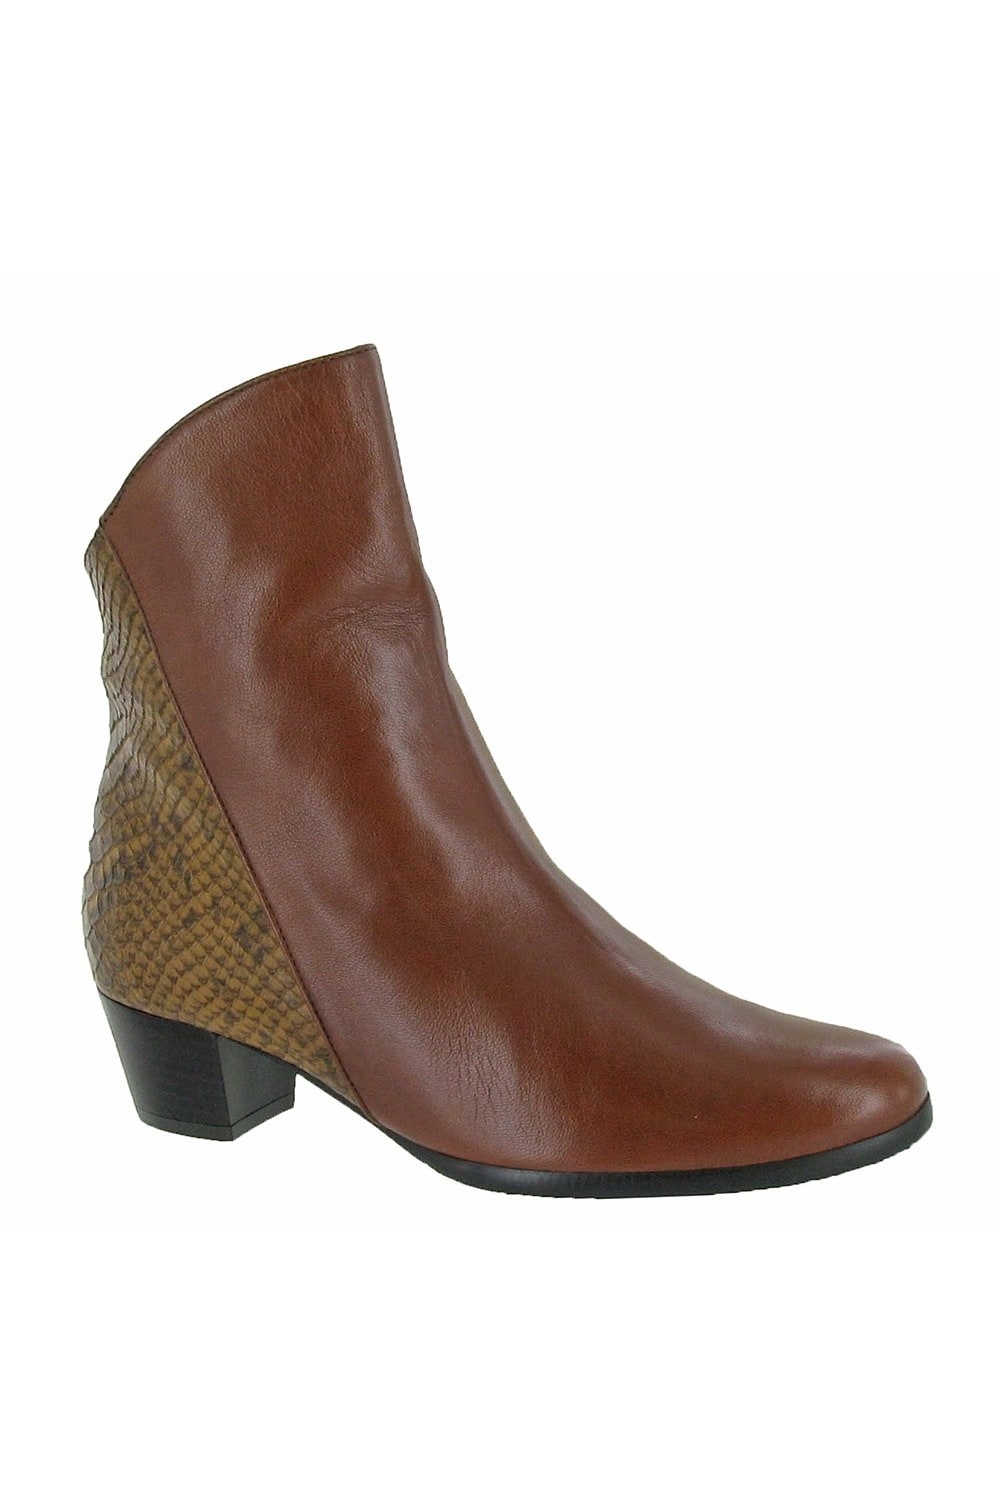 Riva Womens/Ladies Armadillo Pitone Leather Zip Up Ankle Boots